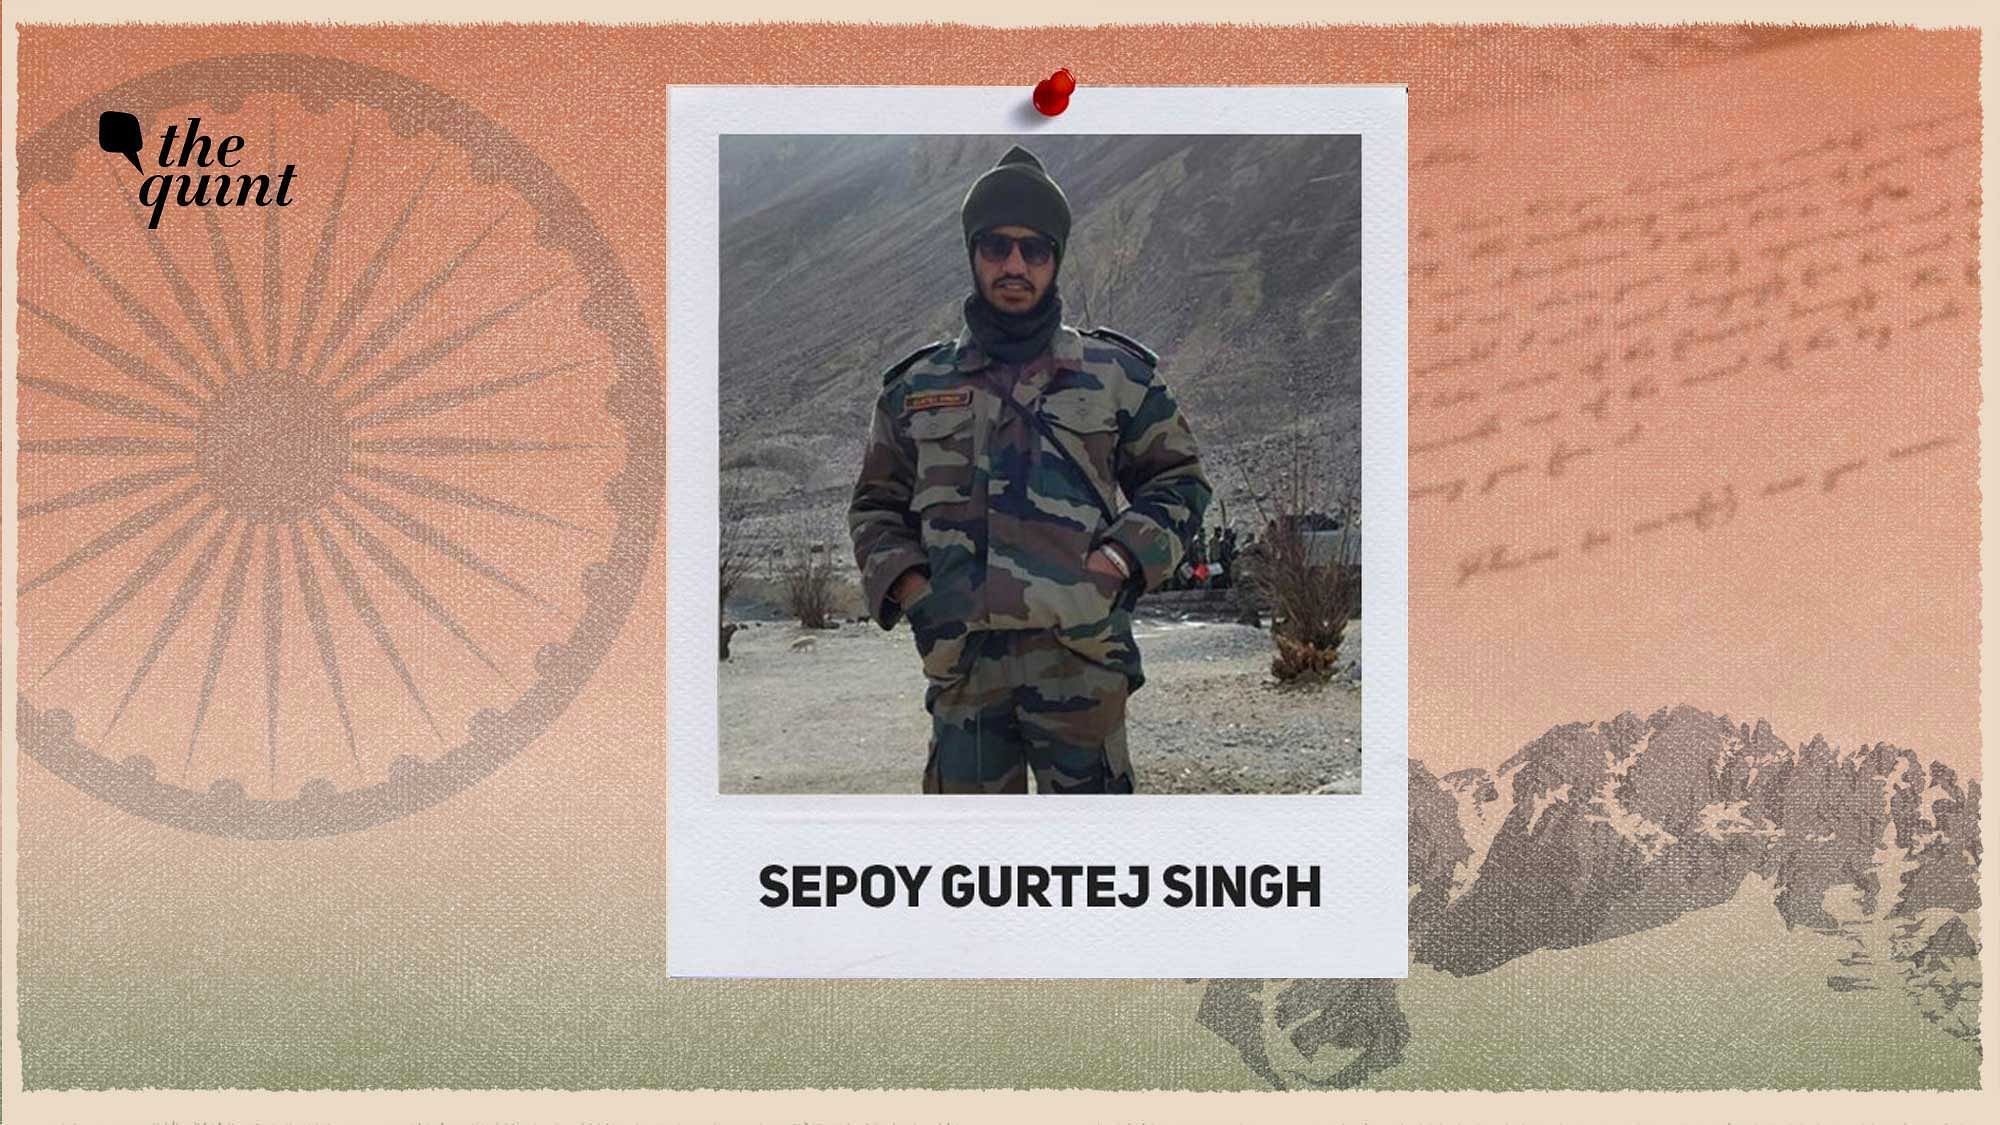 From 3 Punjab’s ‘Ghatak Platoon’ late sepoy Gurtej Singh took down Chinese soldiers before attaining martyrdom on 15 June at Galwan.